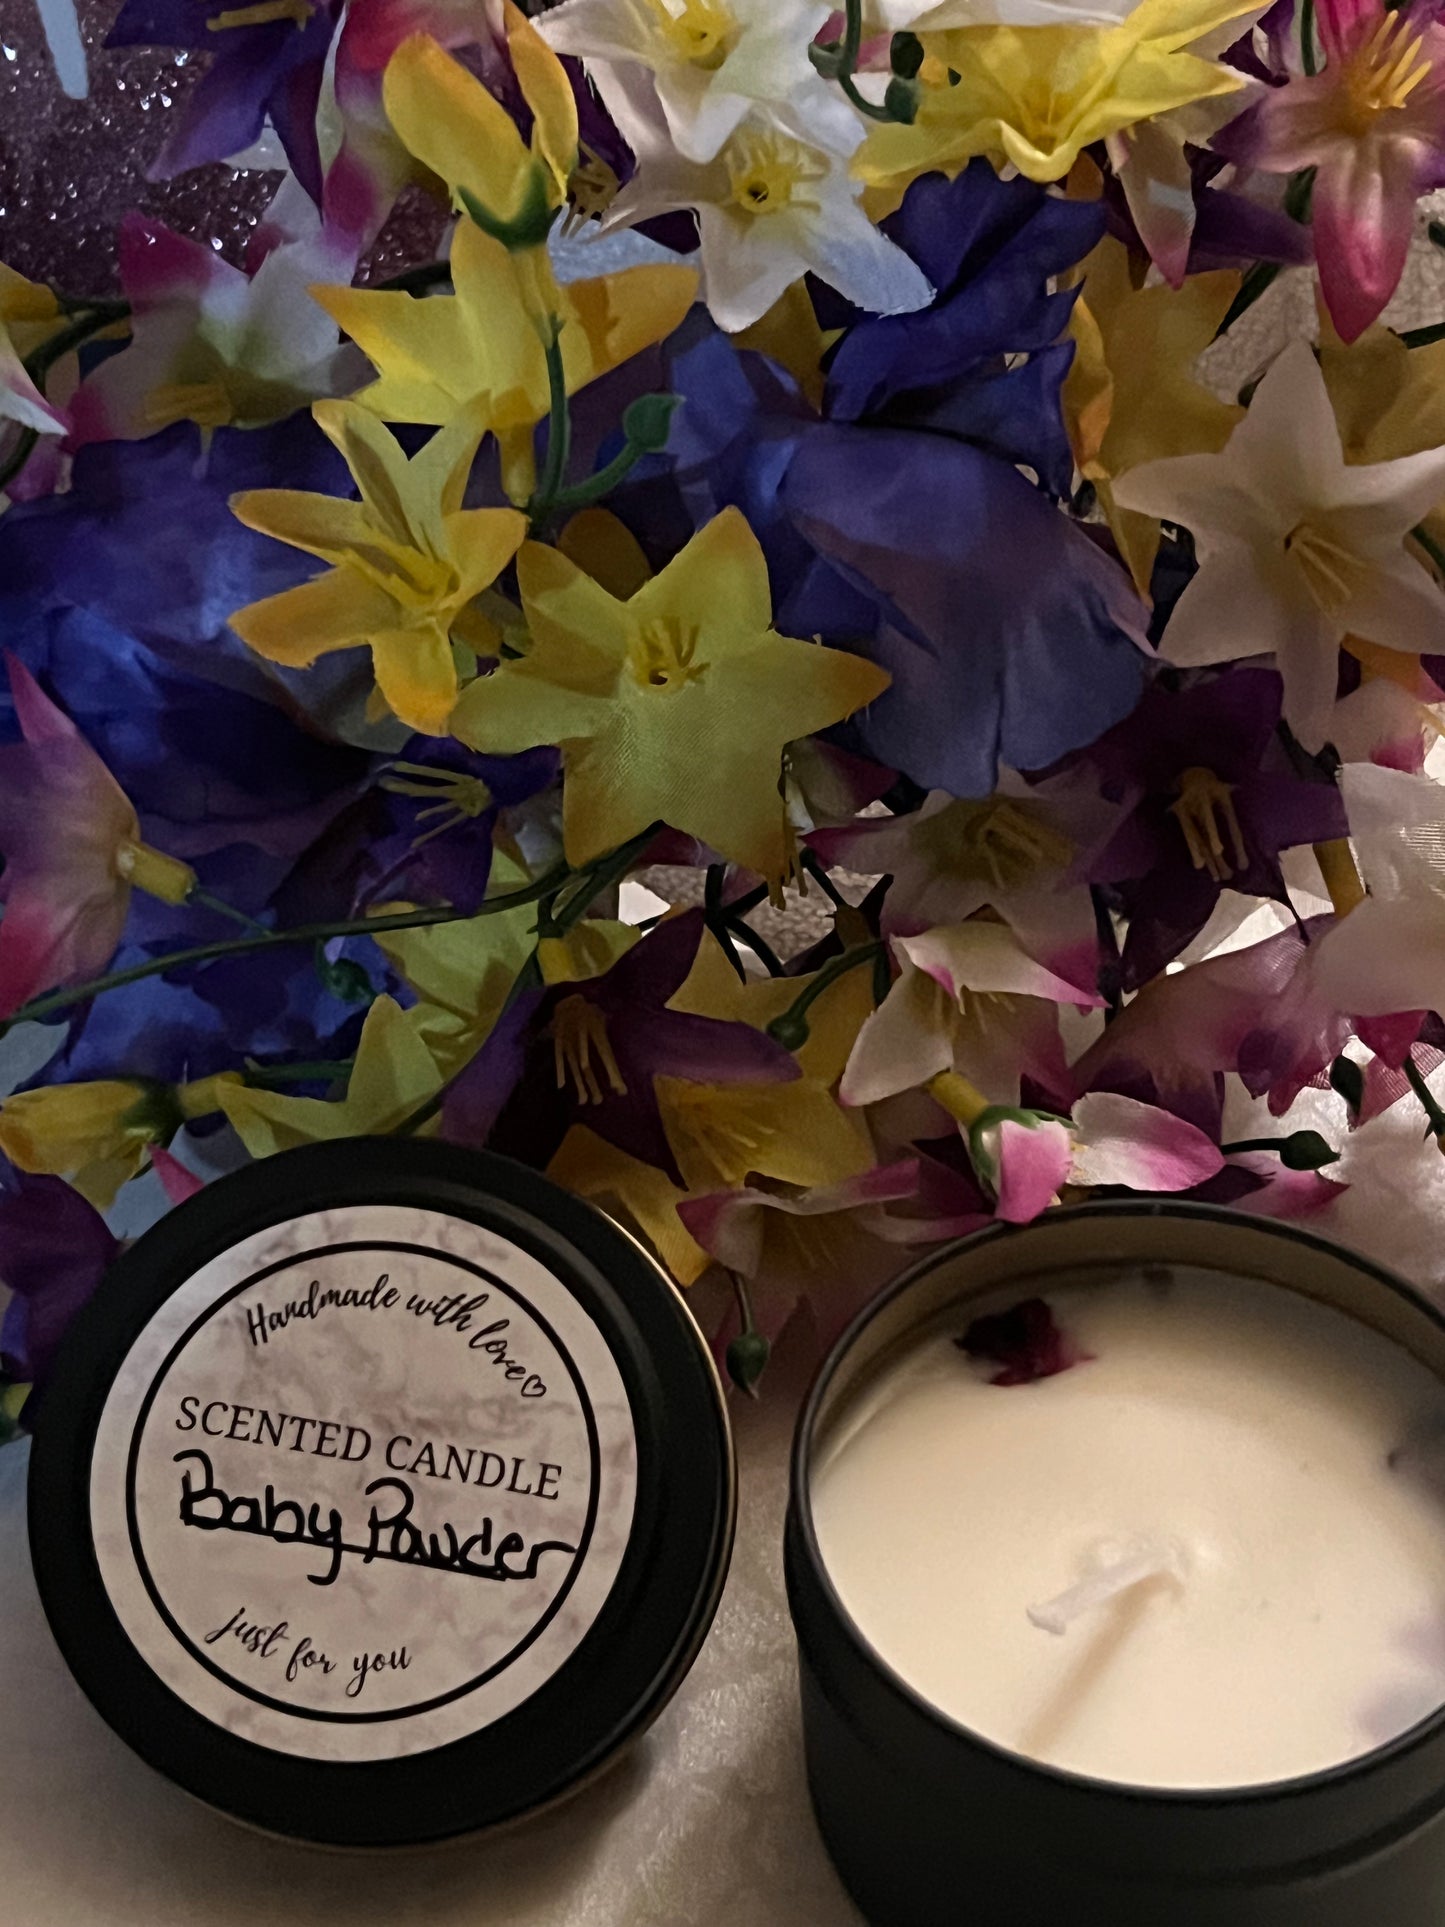 Baby Powder scented Candles